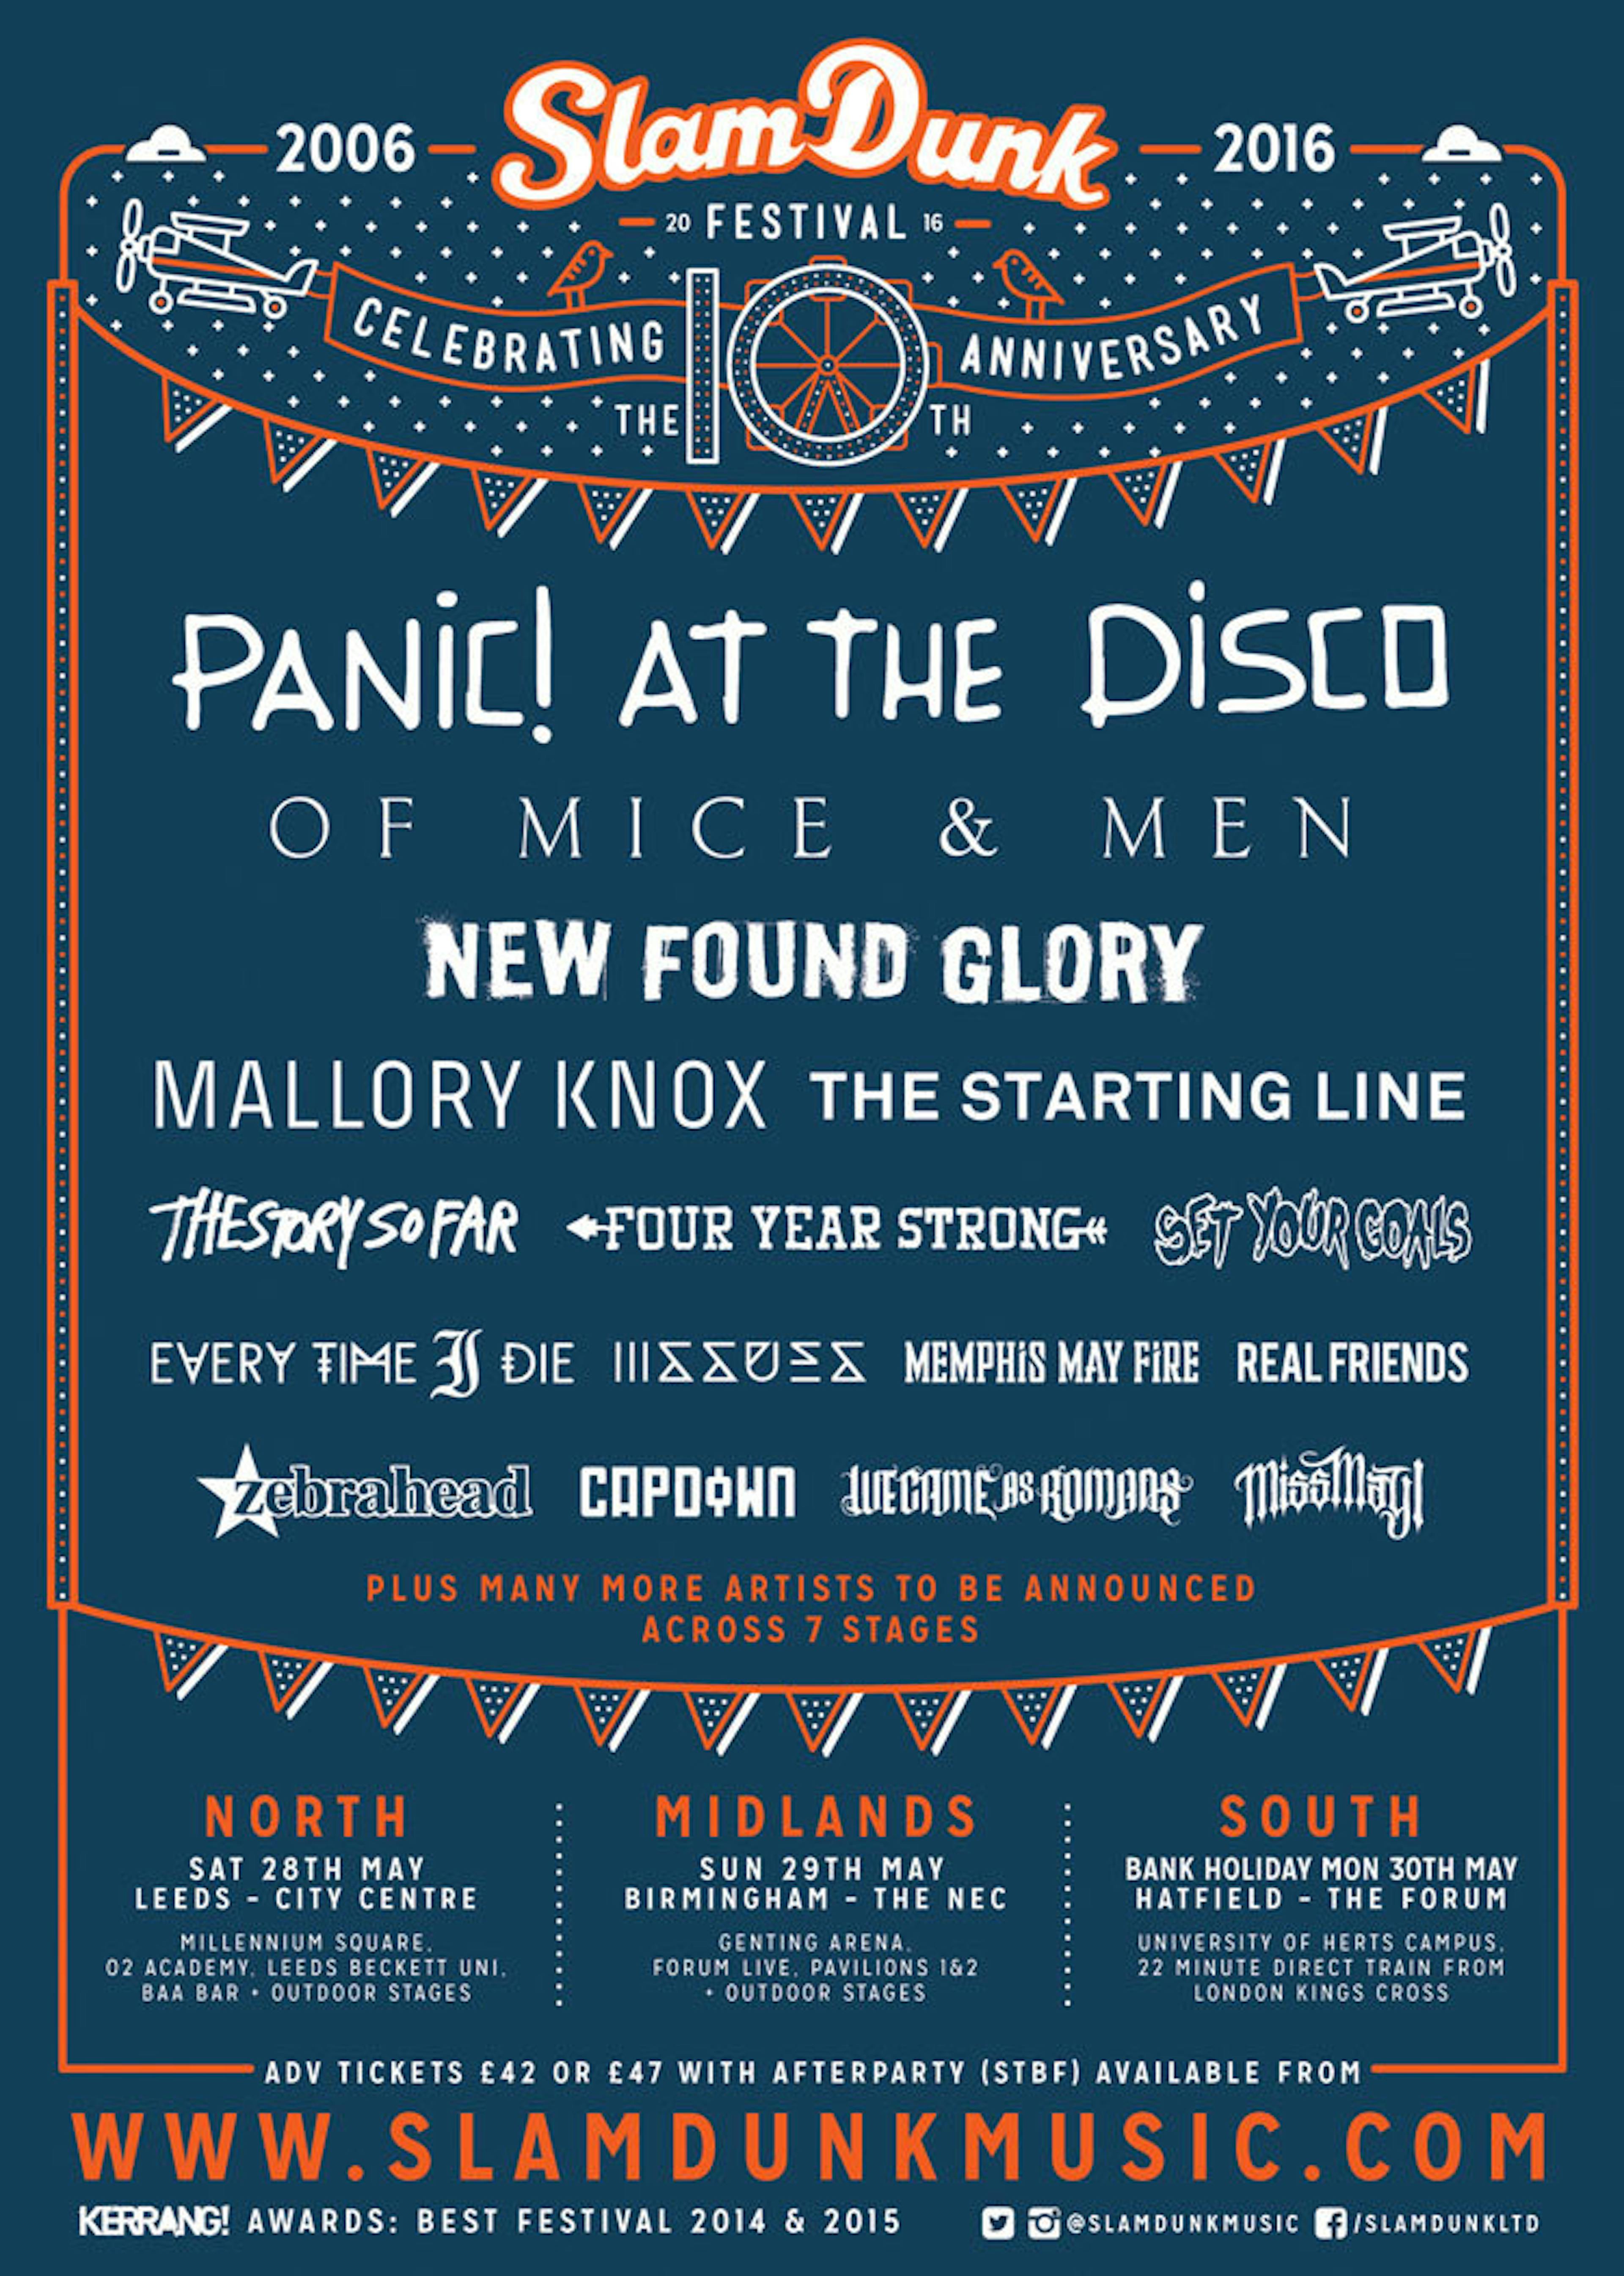 New Bands Added To Slam Dunk!